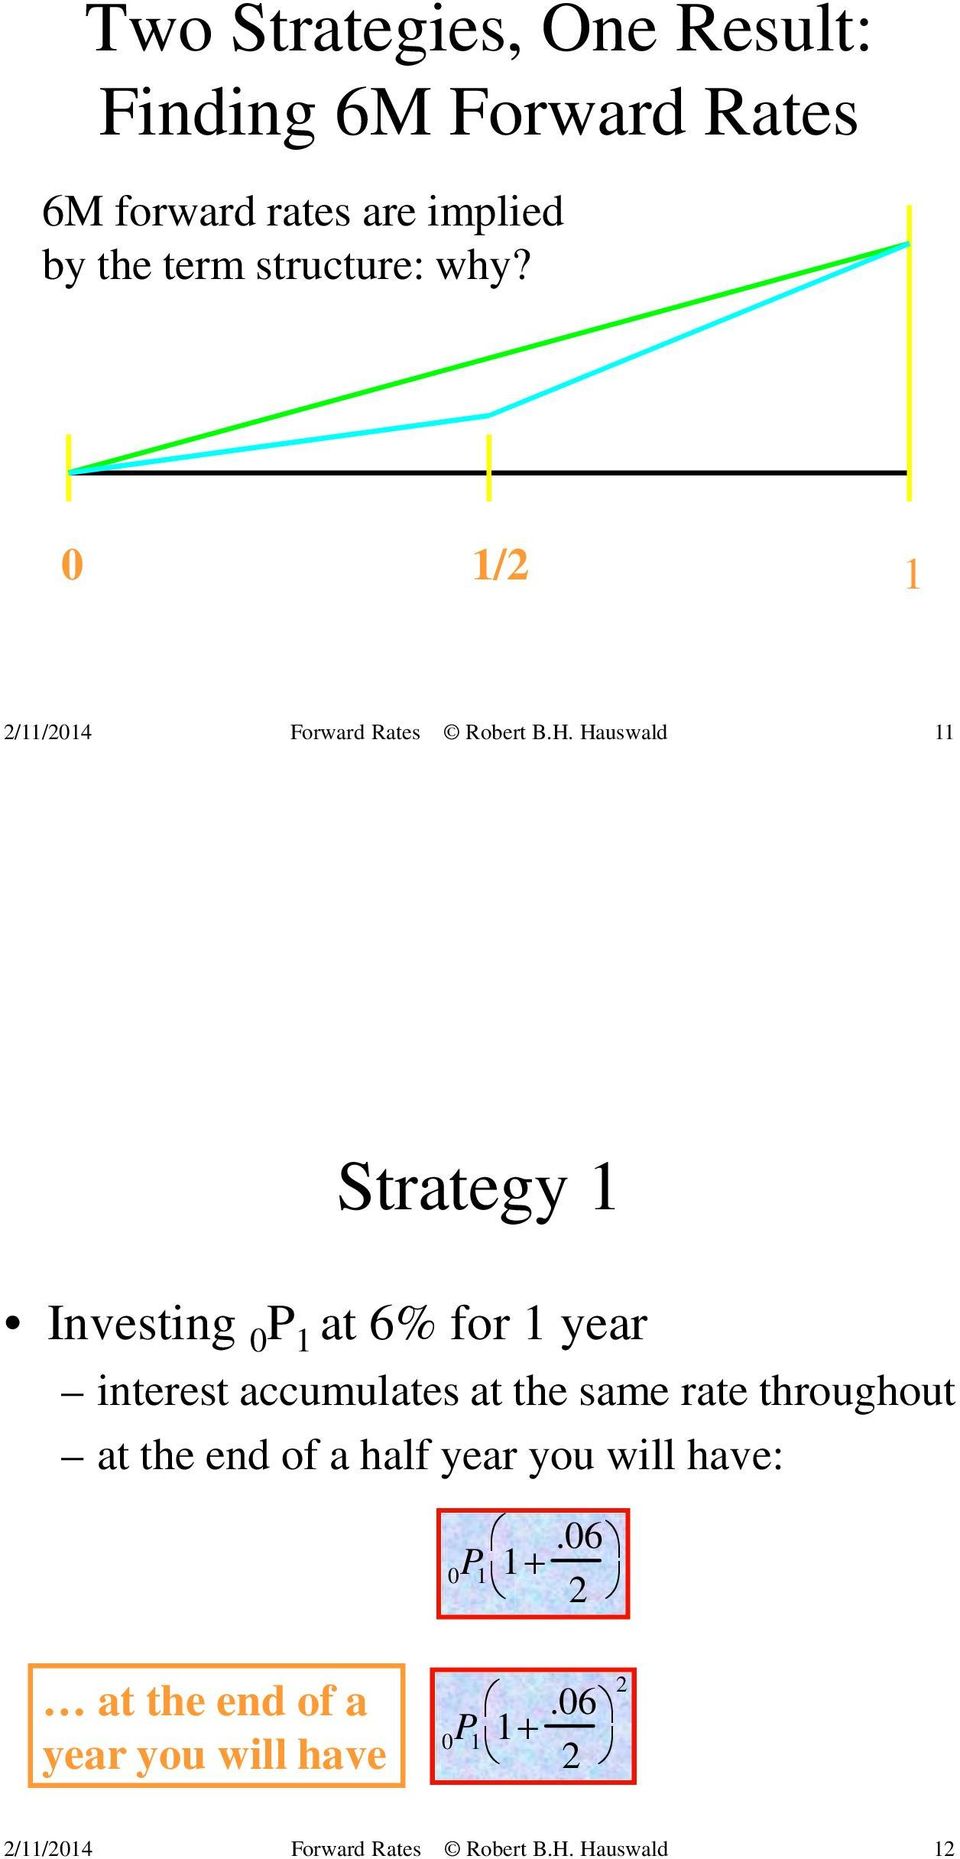 0 1/2 1 11 Strategy 1 Investing 0 P 1 at 6% for 1 year interest accumulates at